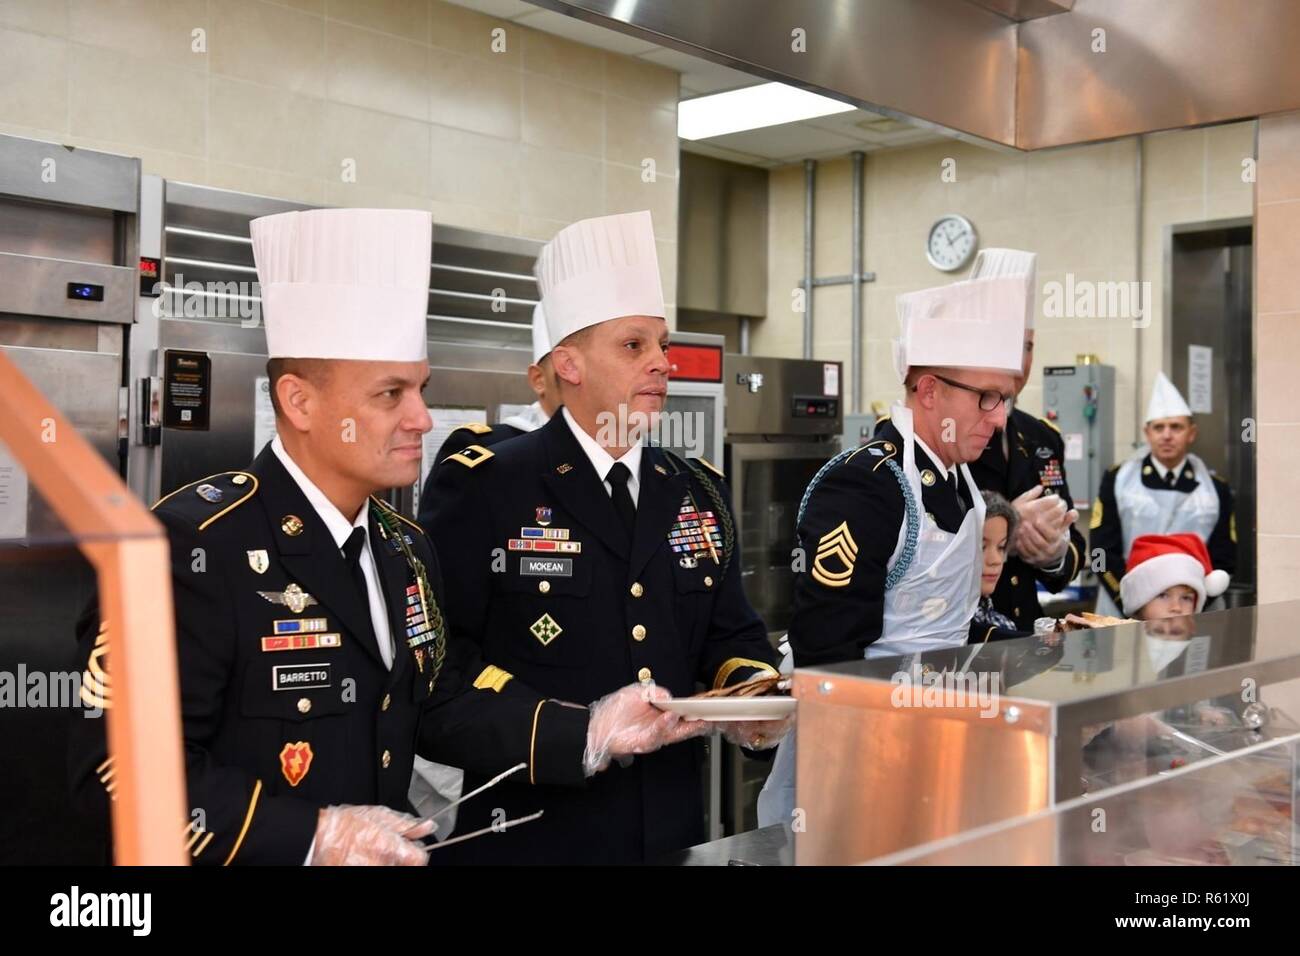 CAMP BONIFAS, Republic of Korea -  Maj. Gen. D. Scott McKean, San Jose, California native, commanding general, 2ID/RUCD and Command Sgt. Maj. Phil K. Barretto, Aiea, Hawaii native, 2ID/RUCD sergeant major serve Thanksgiving meals to Soldiers who are stationed away from home at Bonifas Dining Facility Nov. 22. The command team traveled around the Republic of Korea, ensuring they served meals to as many Warriors as possible, a long-standing military tradition on the holidays where leaders serve their Soldiers to demonstrate appreciation for their hard work and dedication. Stock Photo